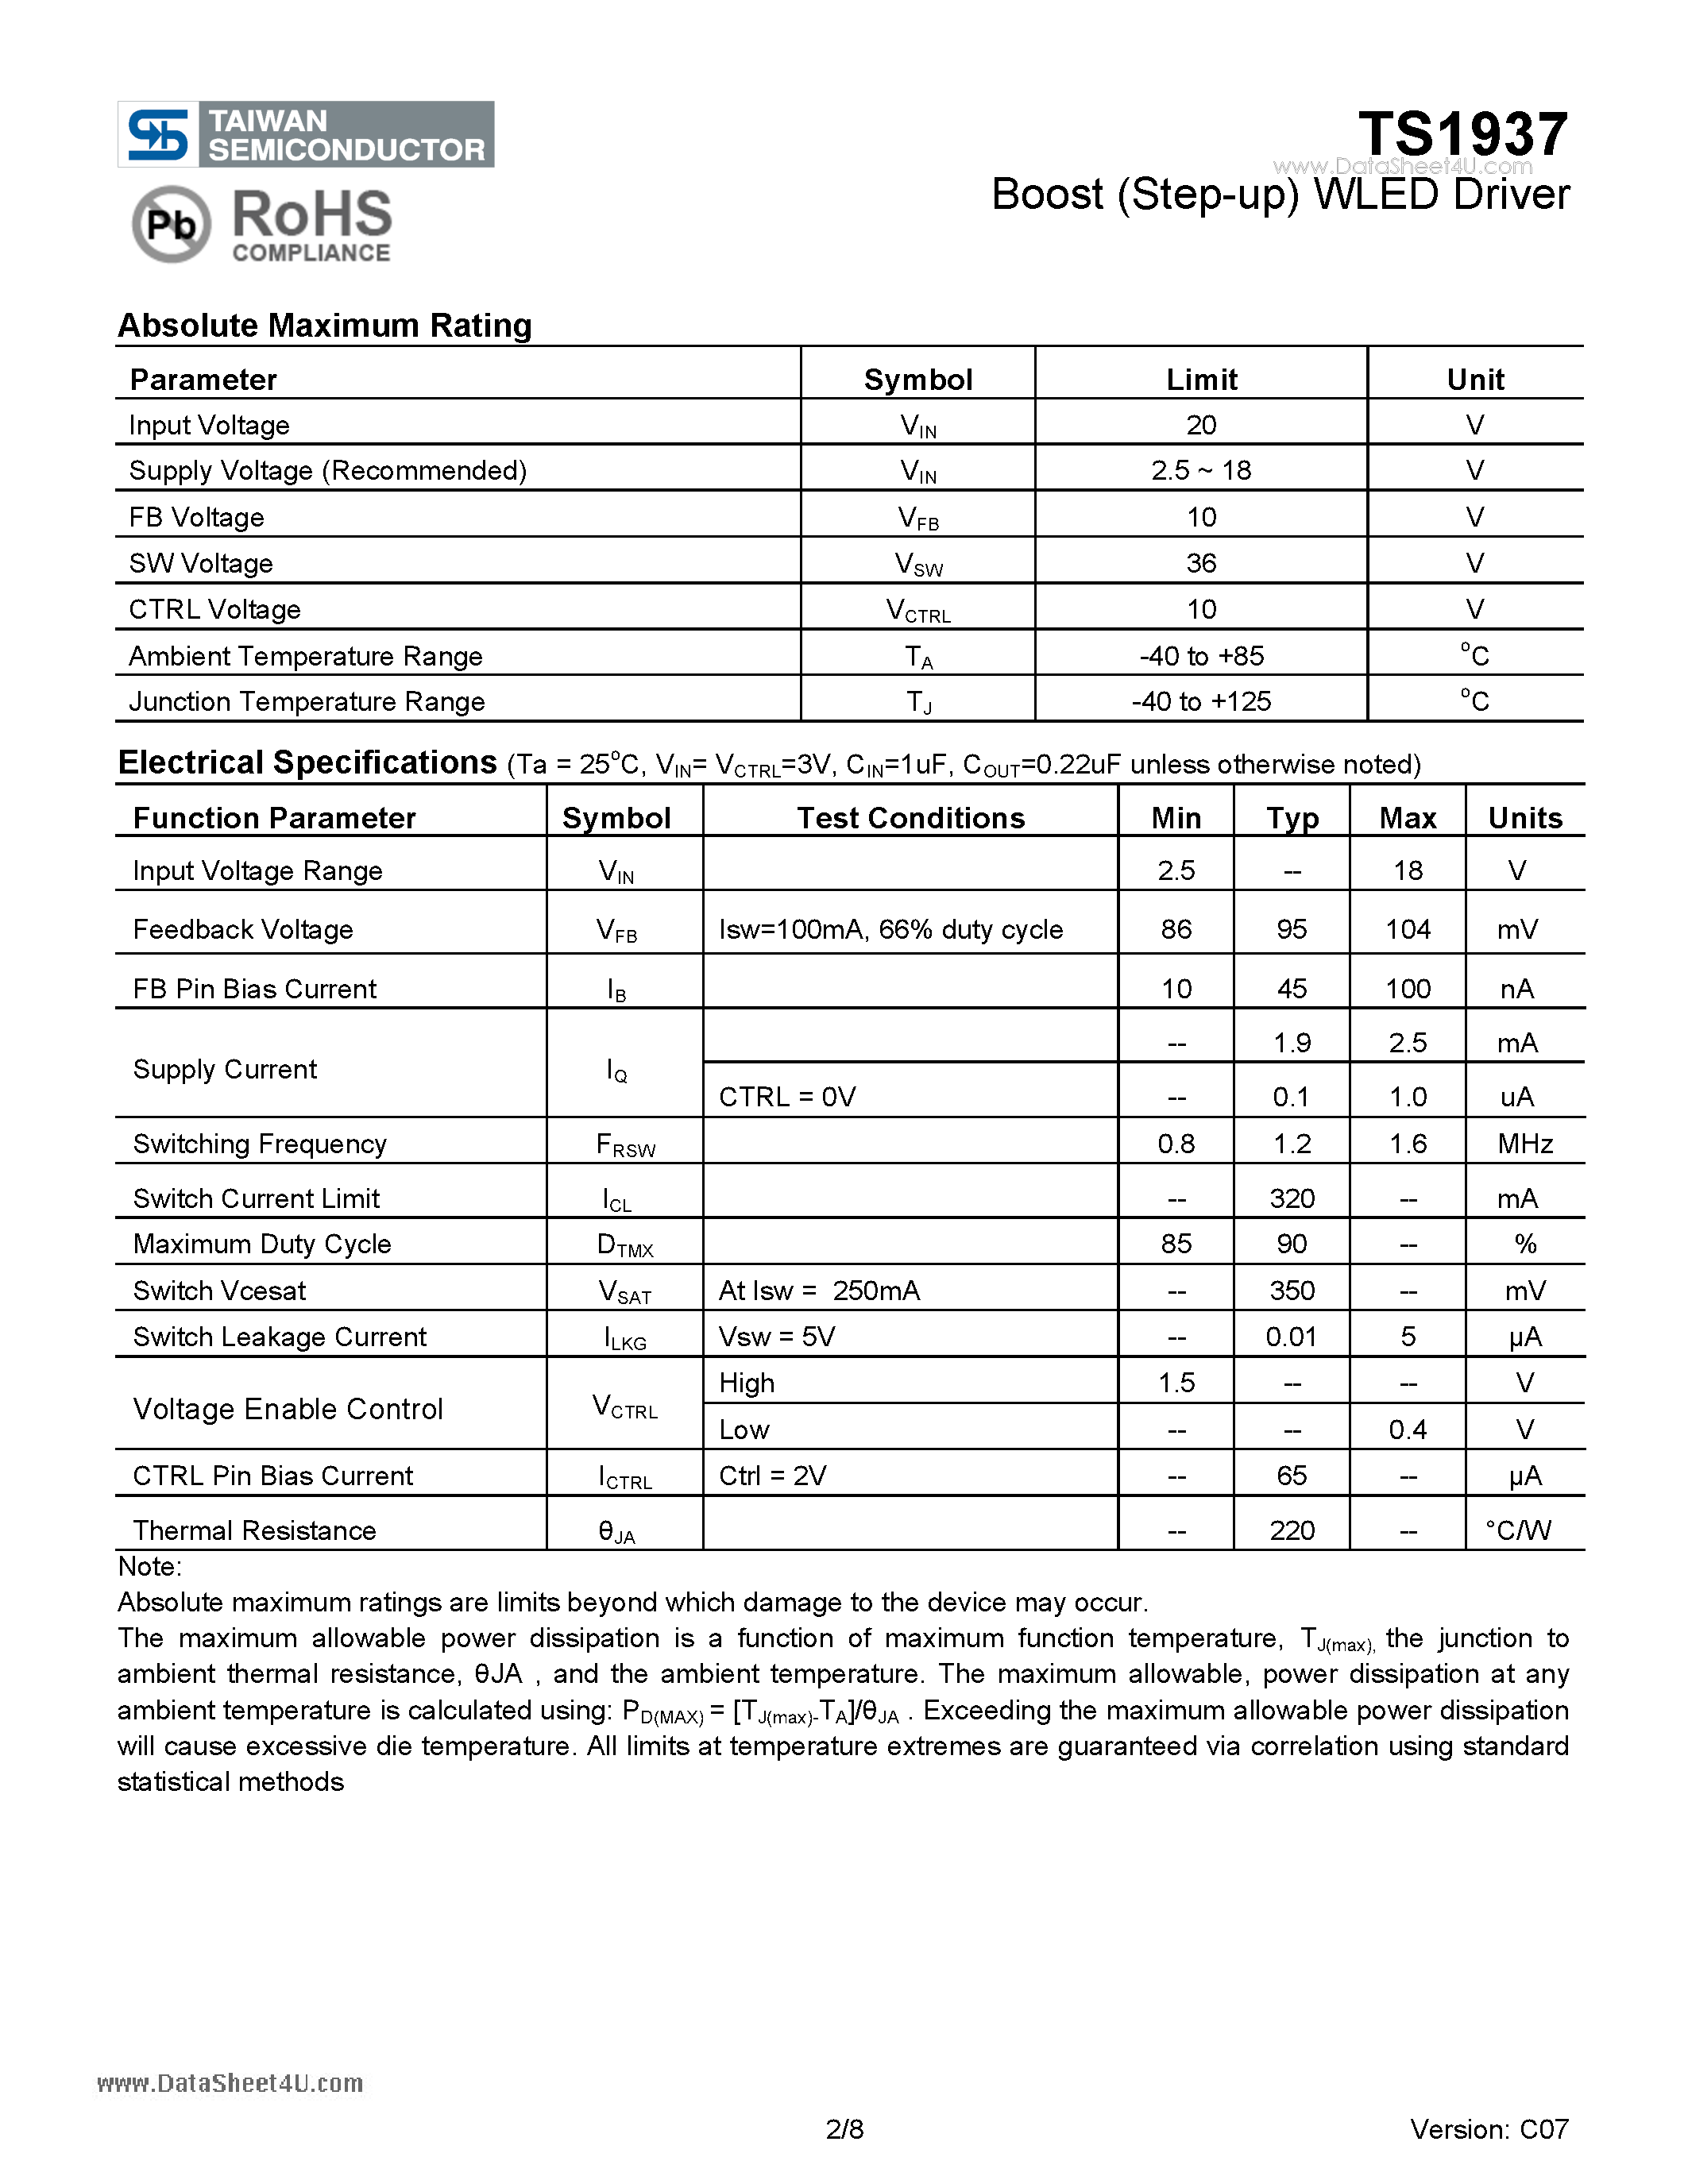 Datasheet TS1937 - Boost (Step-up) WLED Driver page 2